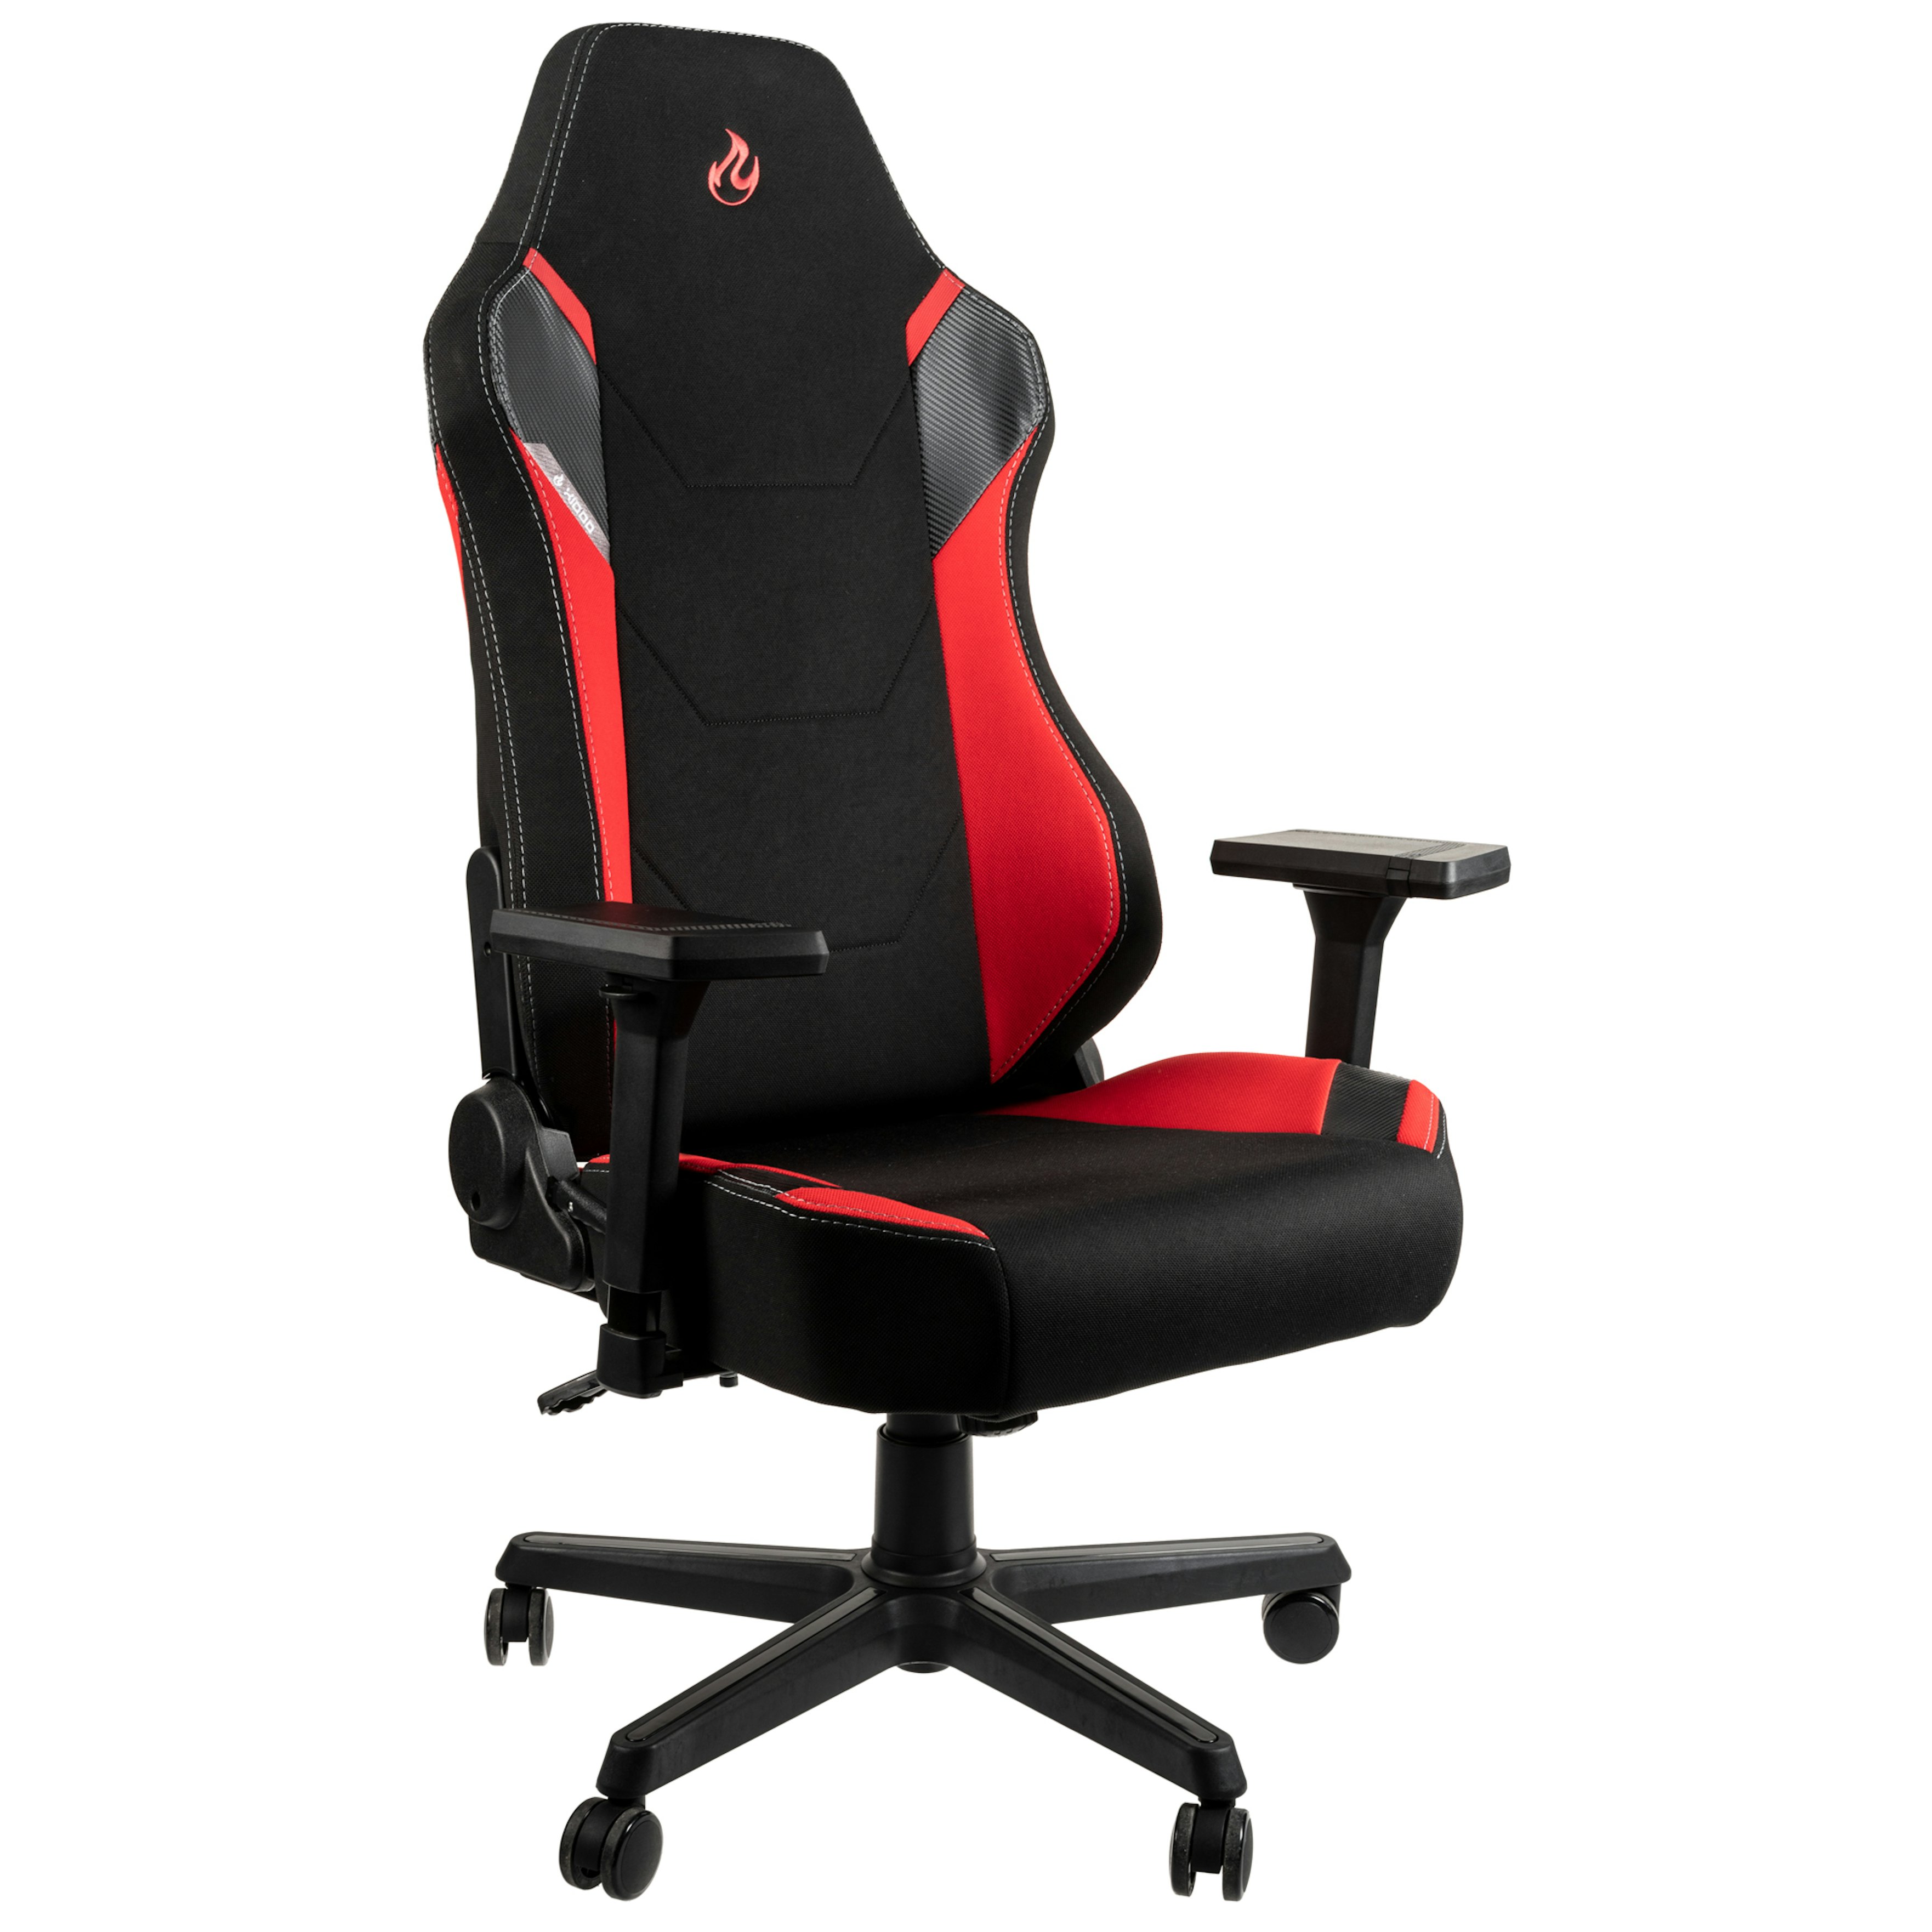 X1000 Gaming Chair Black / Red